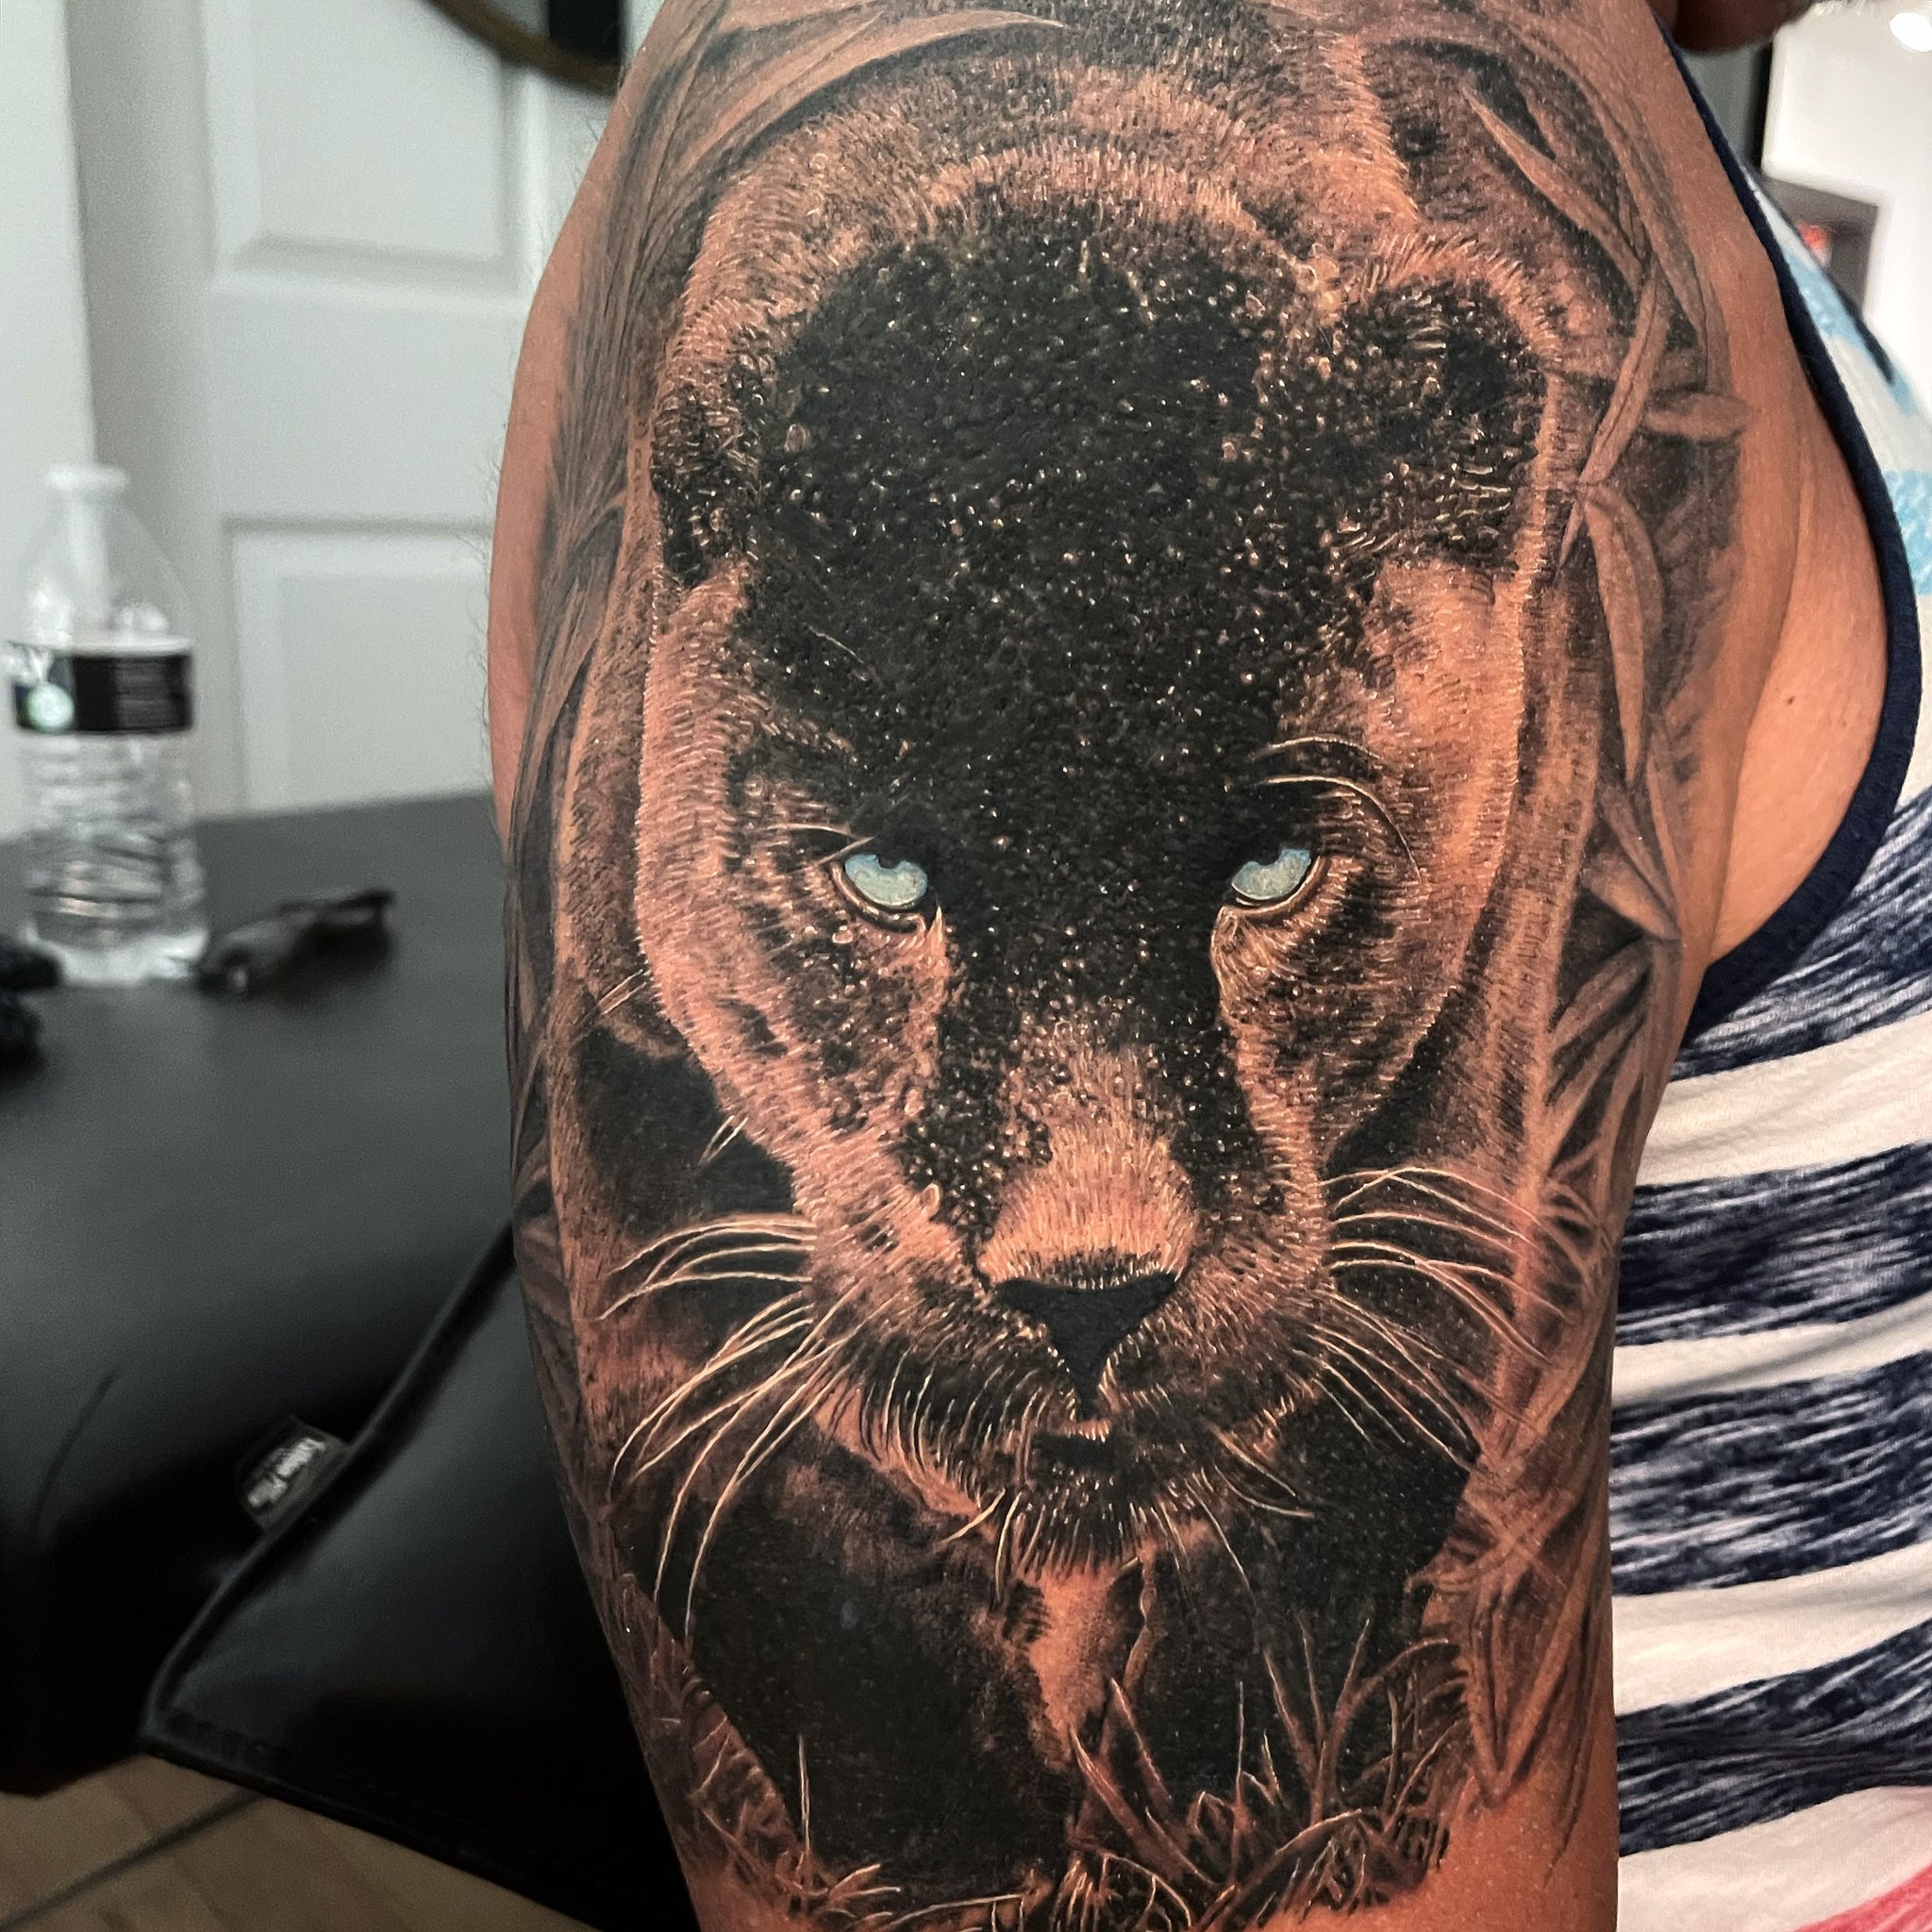 Panther Tattoos: – All Things Tattoo